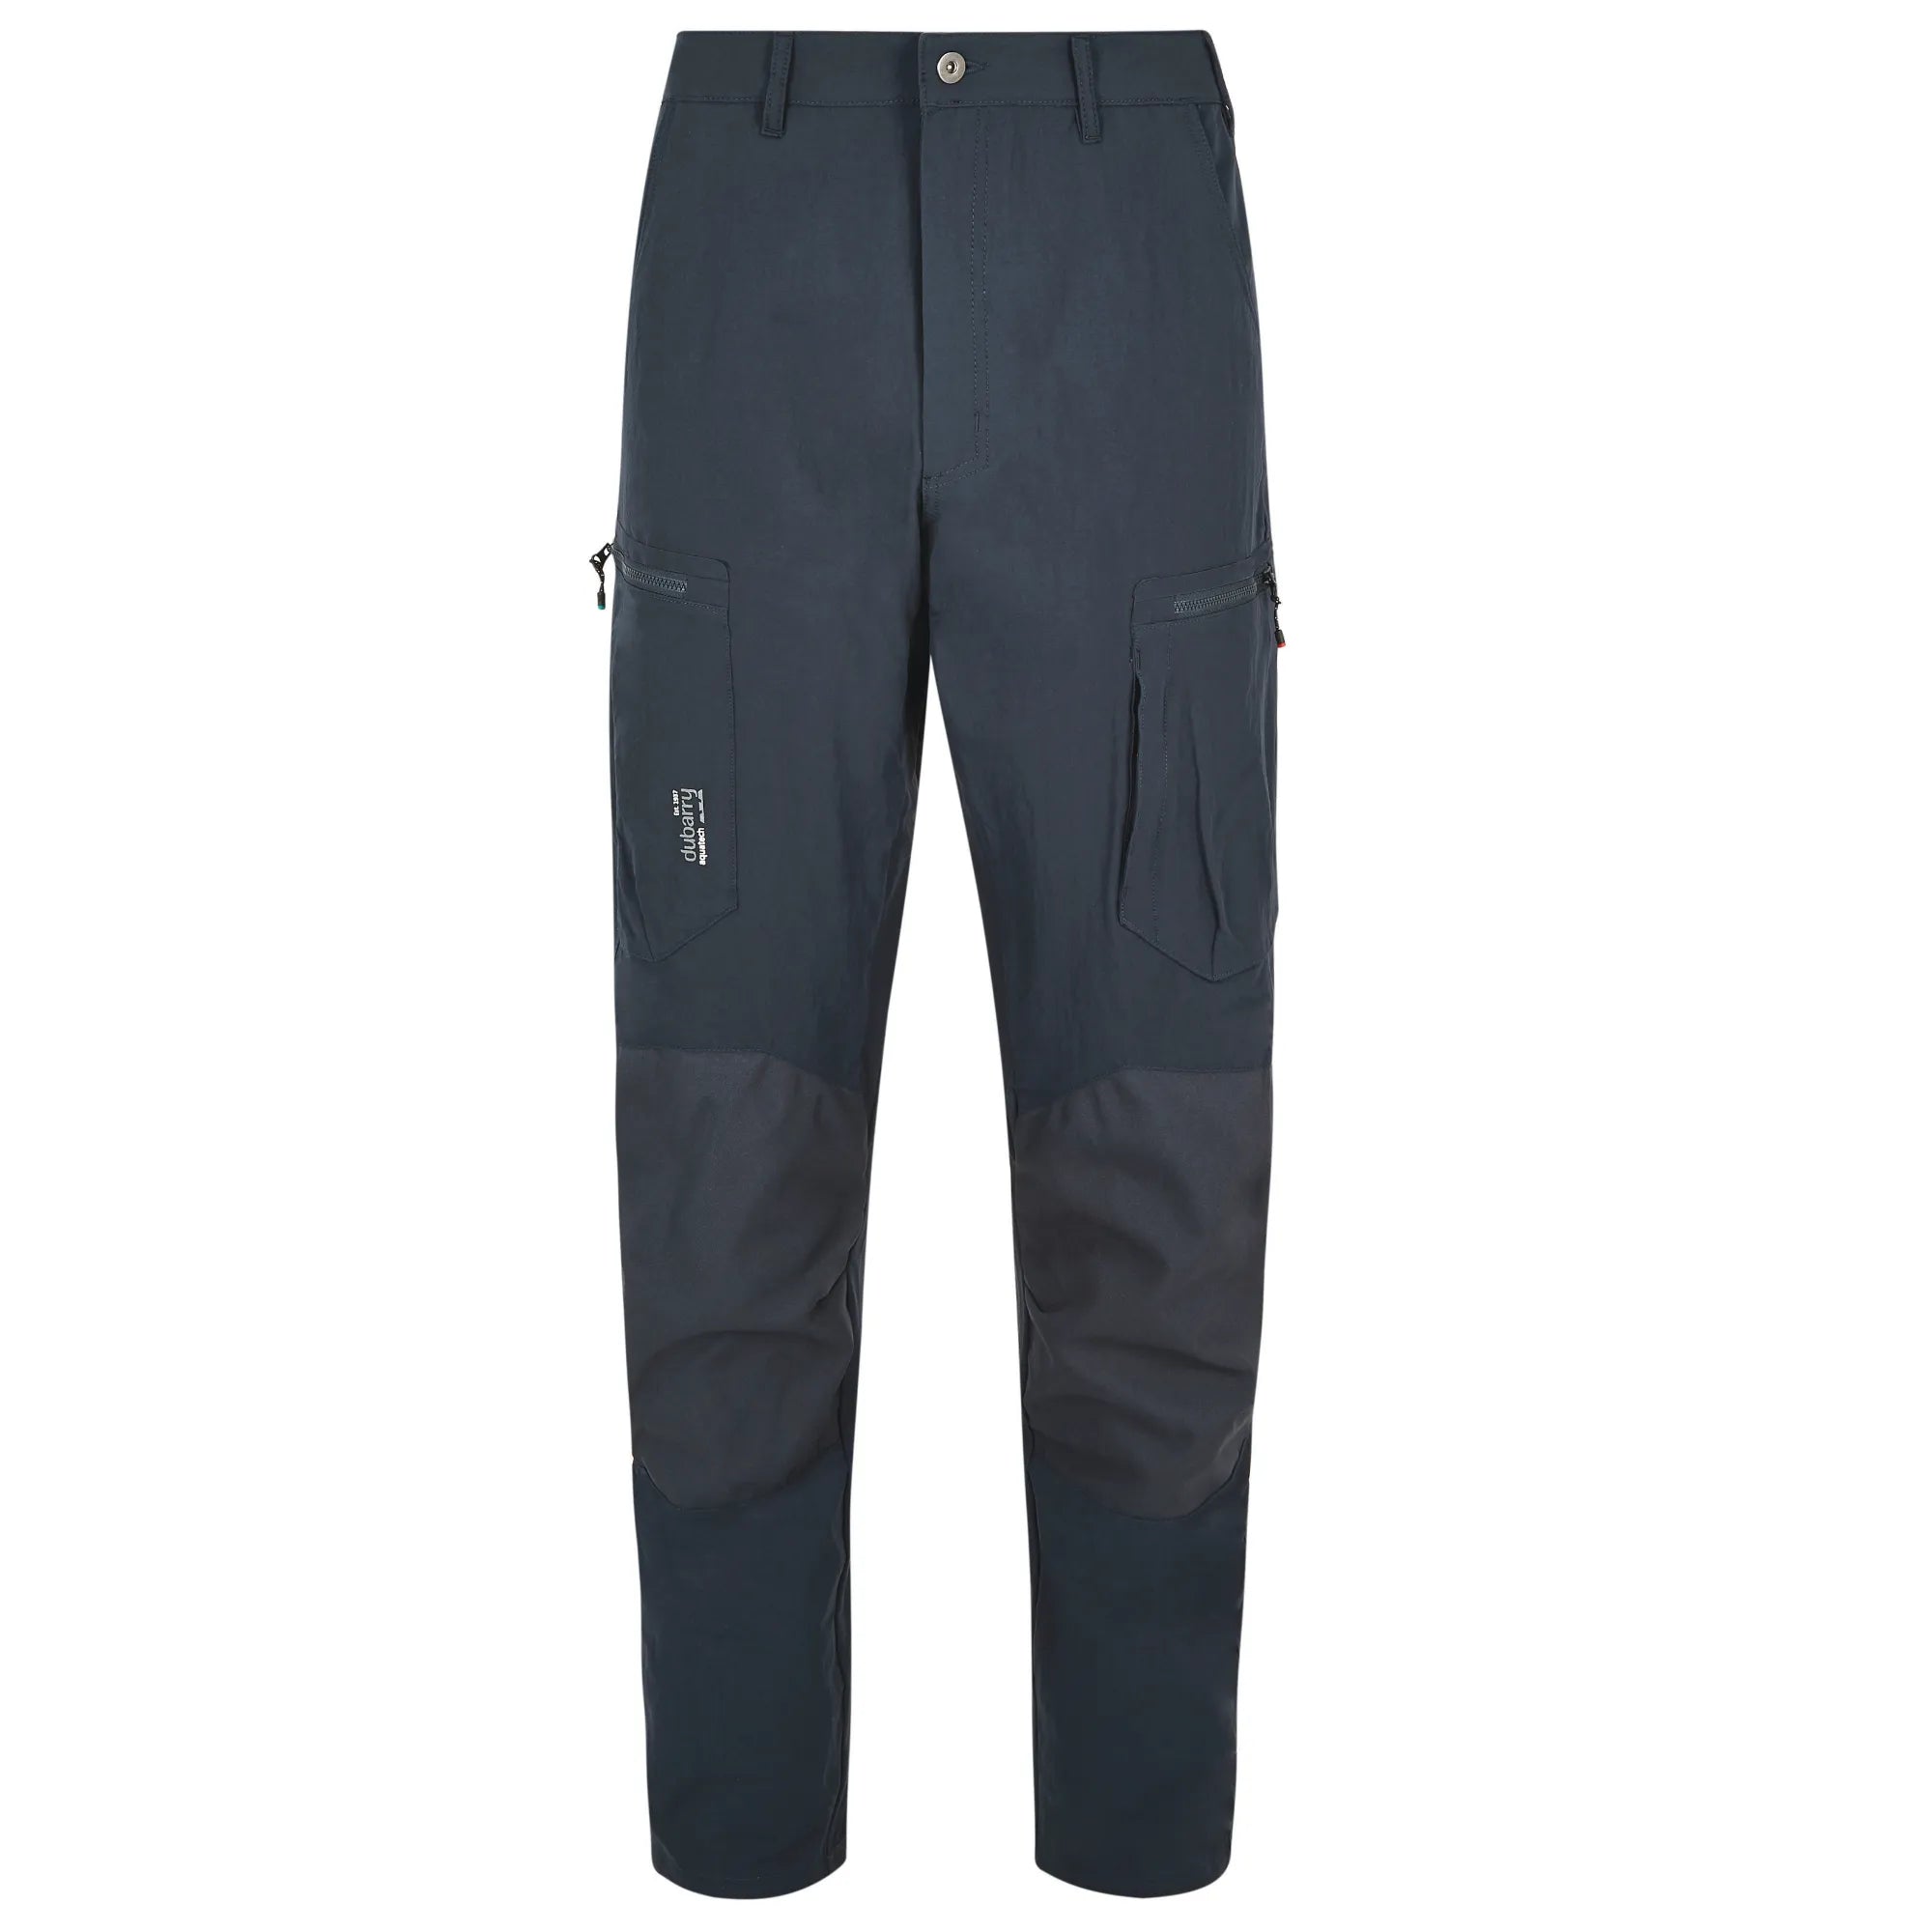 Dubrovnik Trousers - Navy